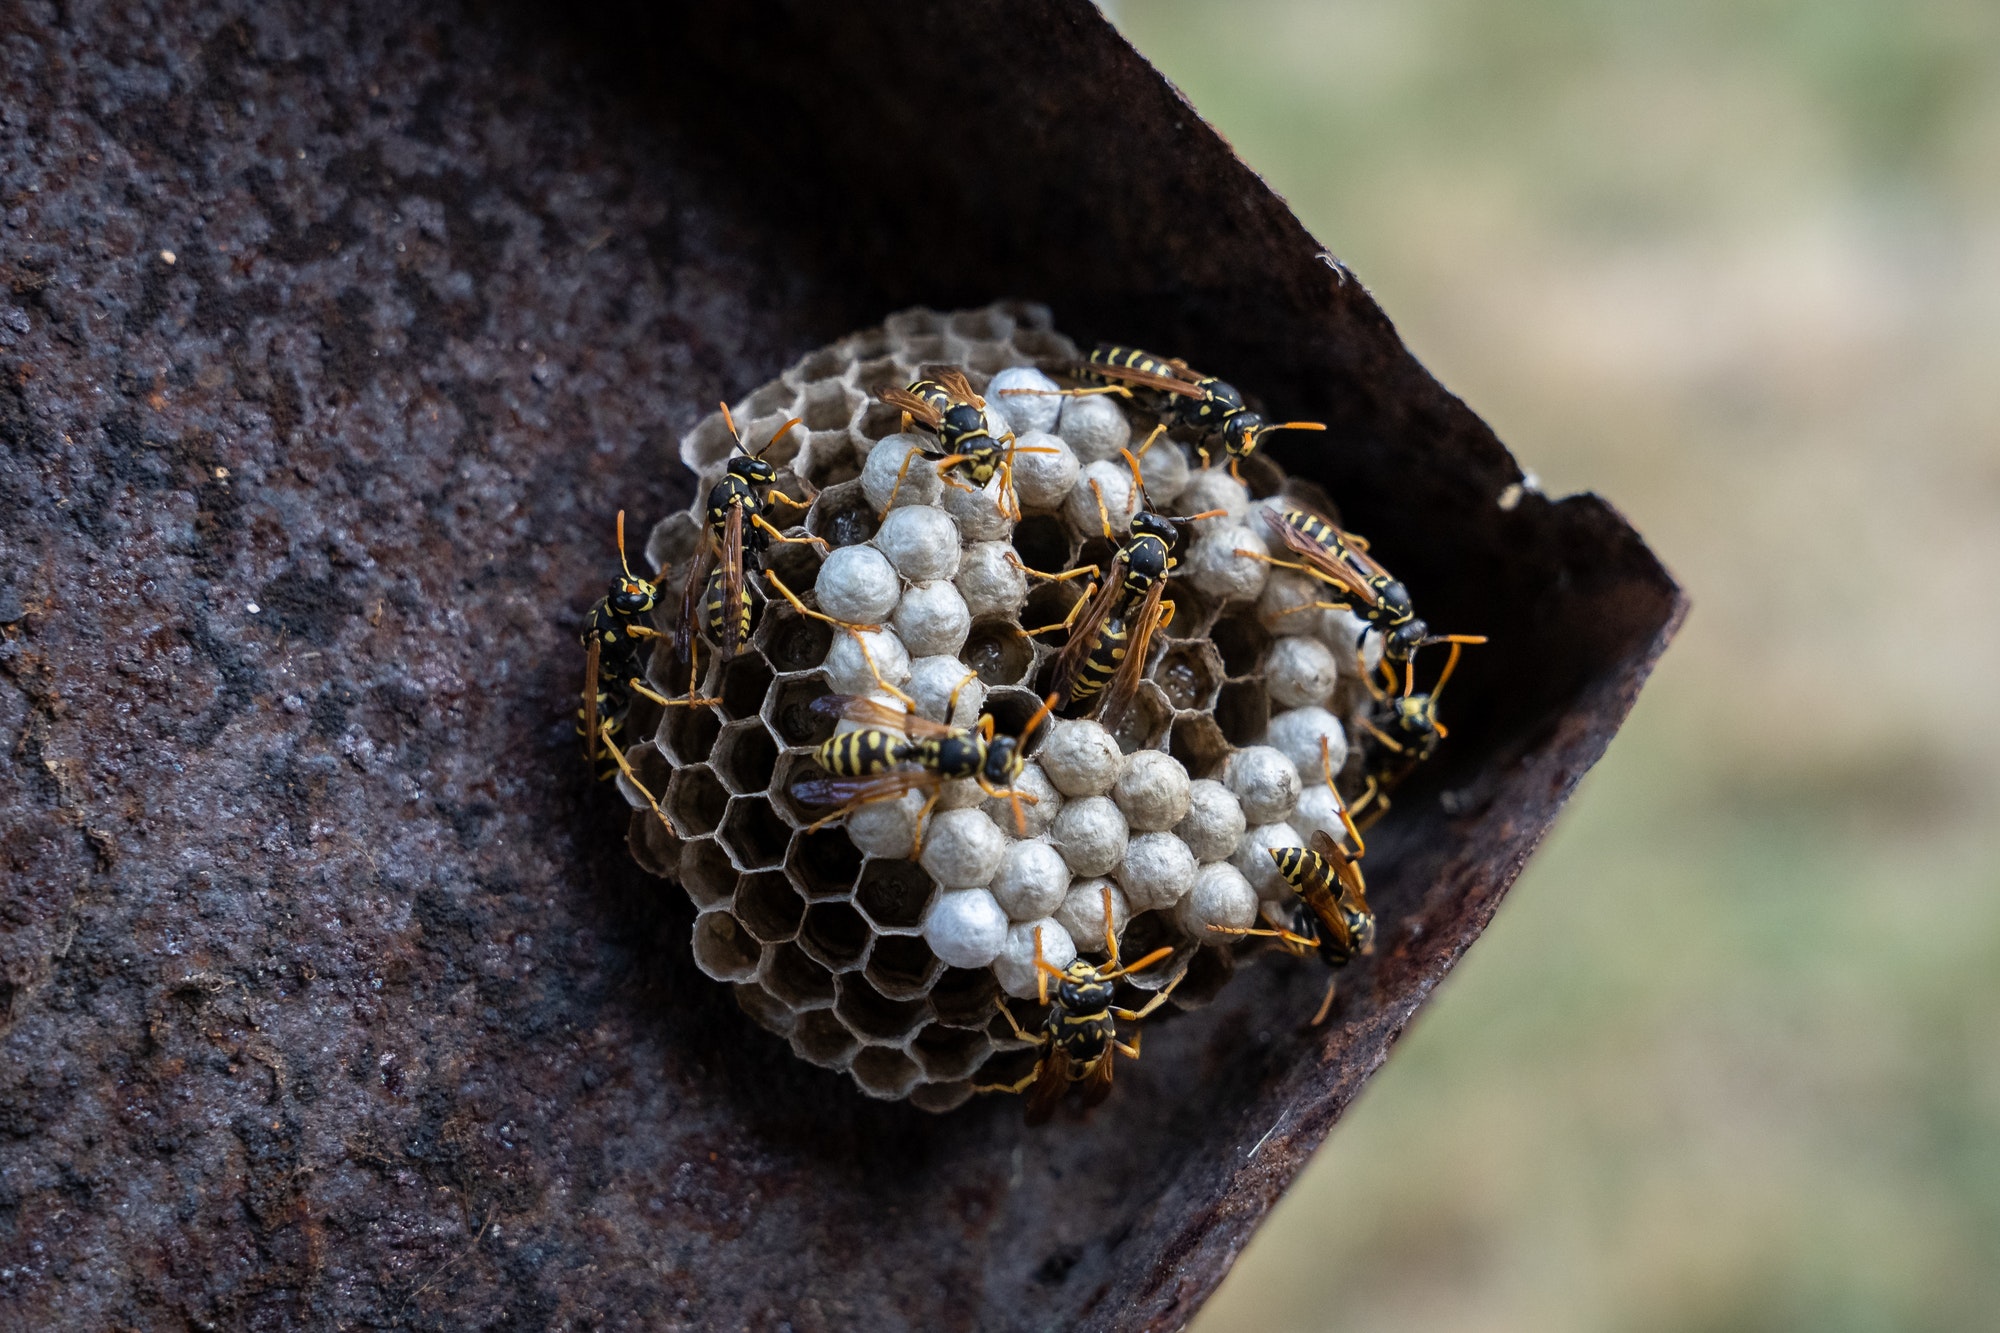 A small wasp nest with working wasps